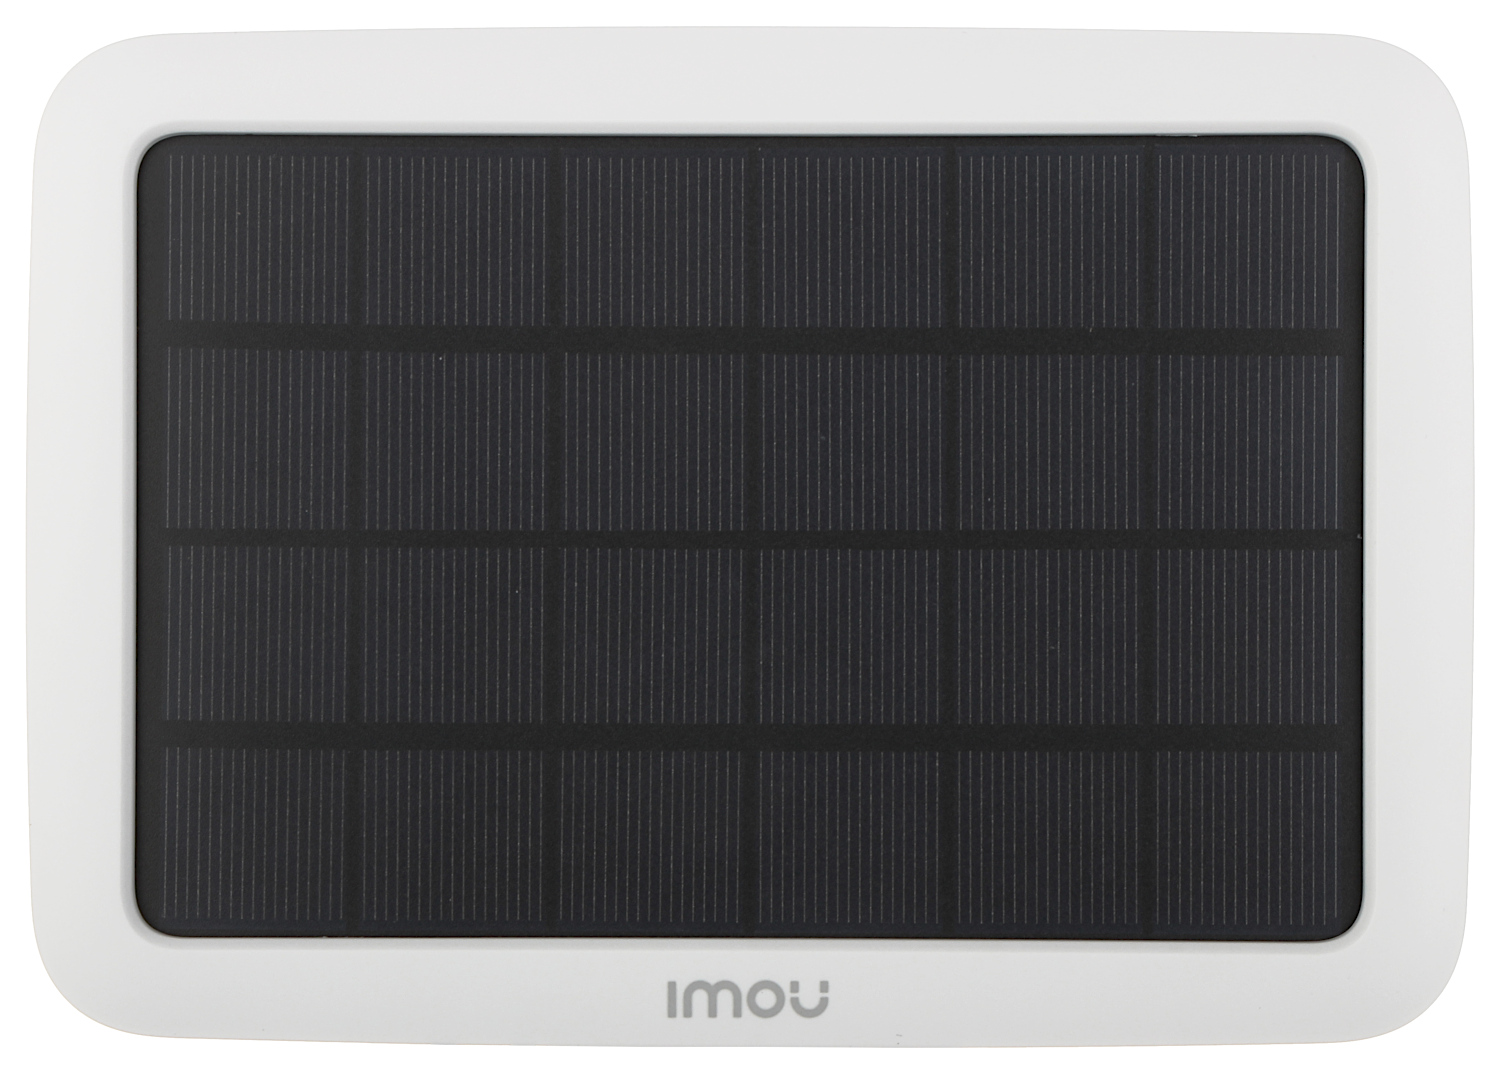 Code: FSP10-IMOU SOLAR PANEL FSP10-IMOU FOR THE IMOU CELL PRO CAMERA Net:  27.90 EUR Gross: 34.32 EUR FSP10-IMOU DESCRIPTION The FSP10-IMOU solar  panel is designed to work with IMOU Cell Pro cameras. The use of the panel  ...